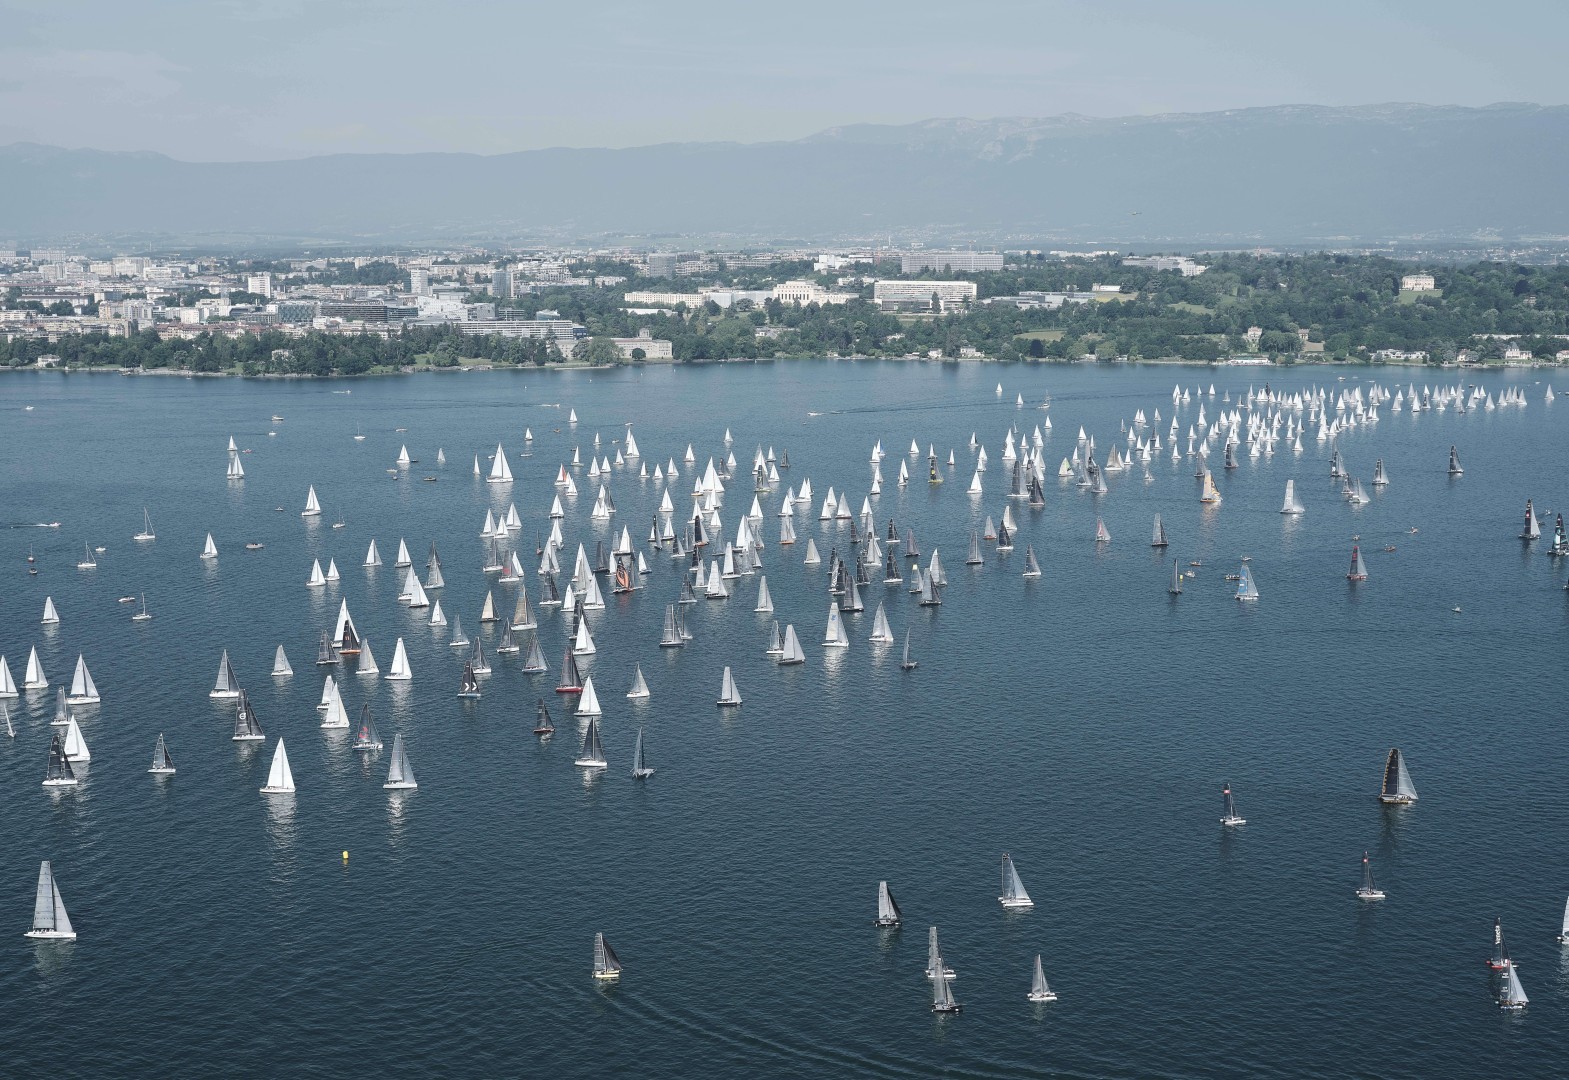 The Bol d'Or Mirabaud 2022: only a month to go